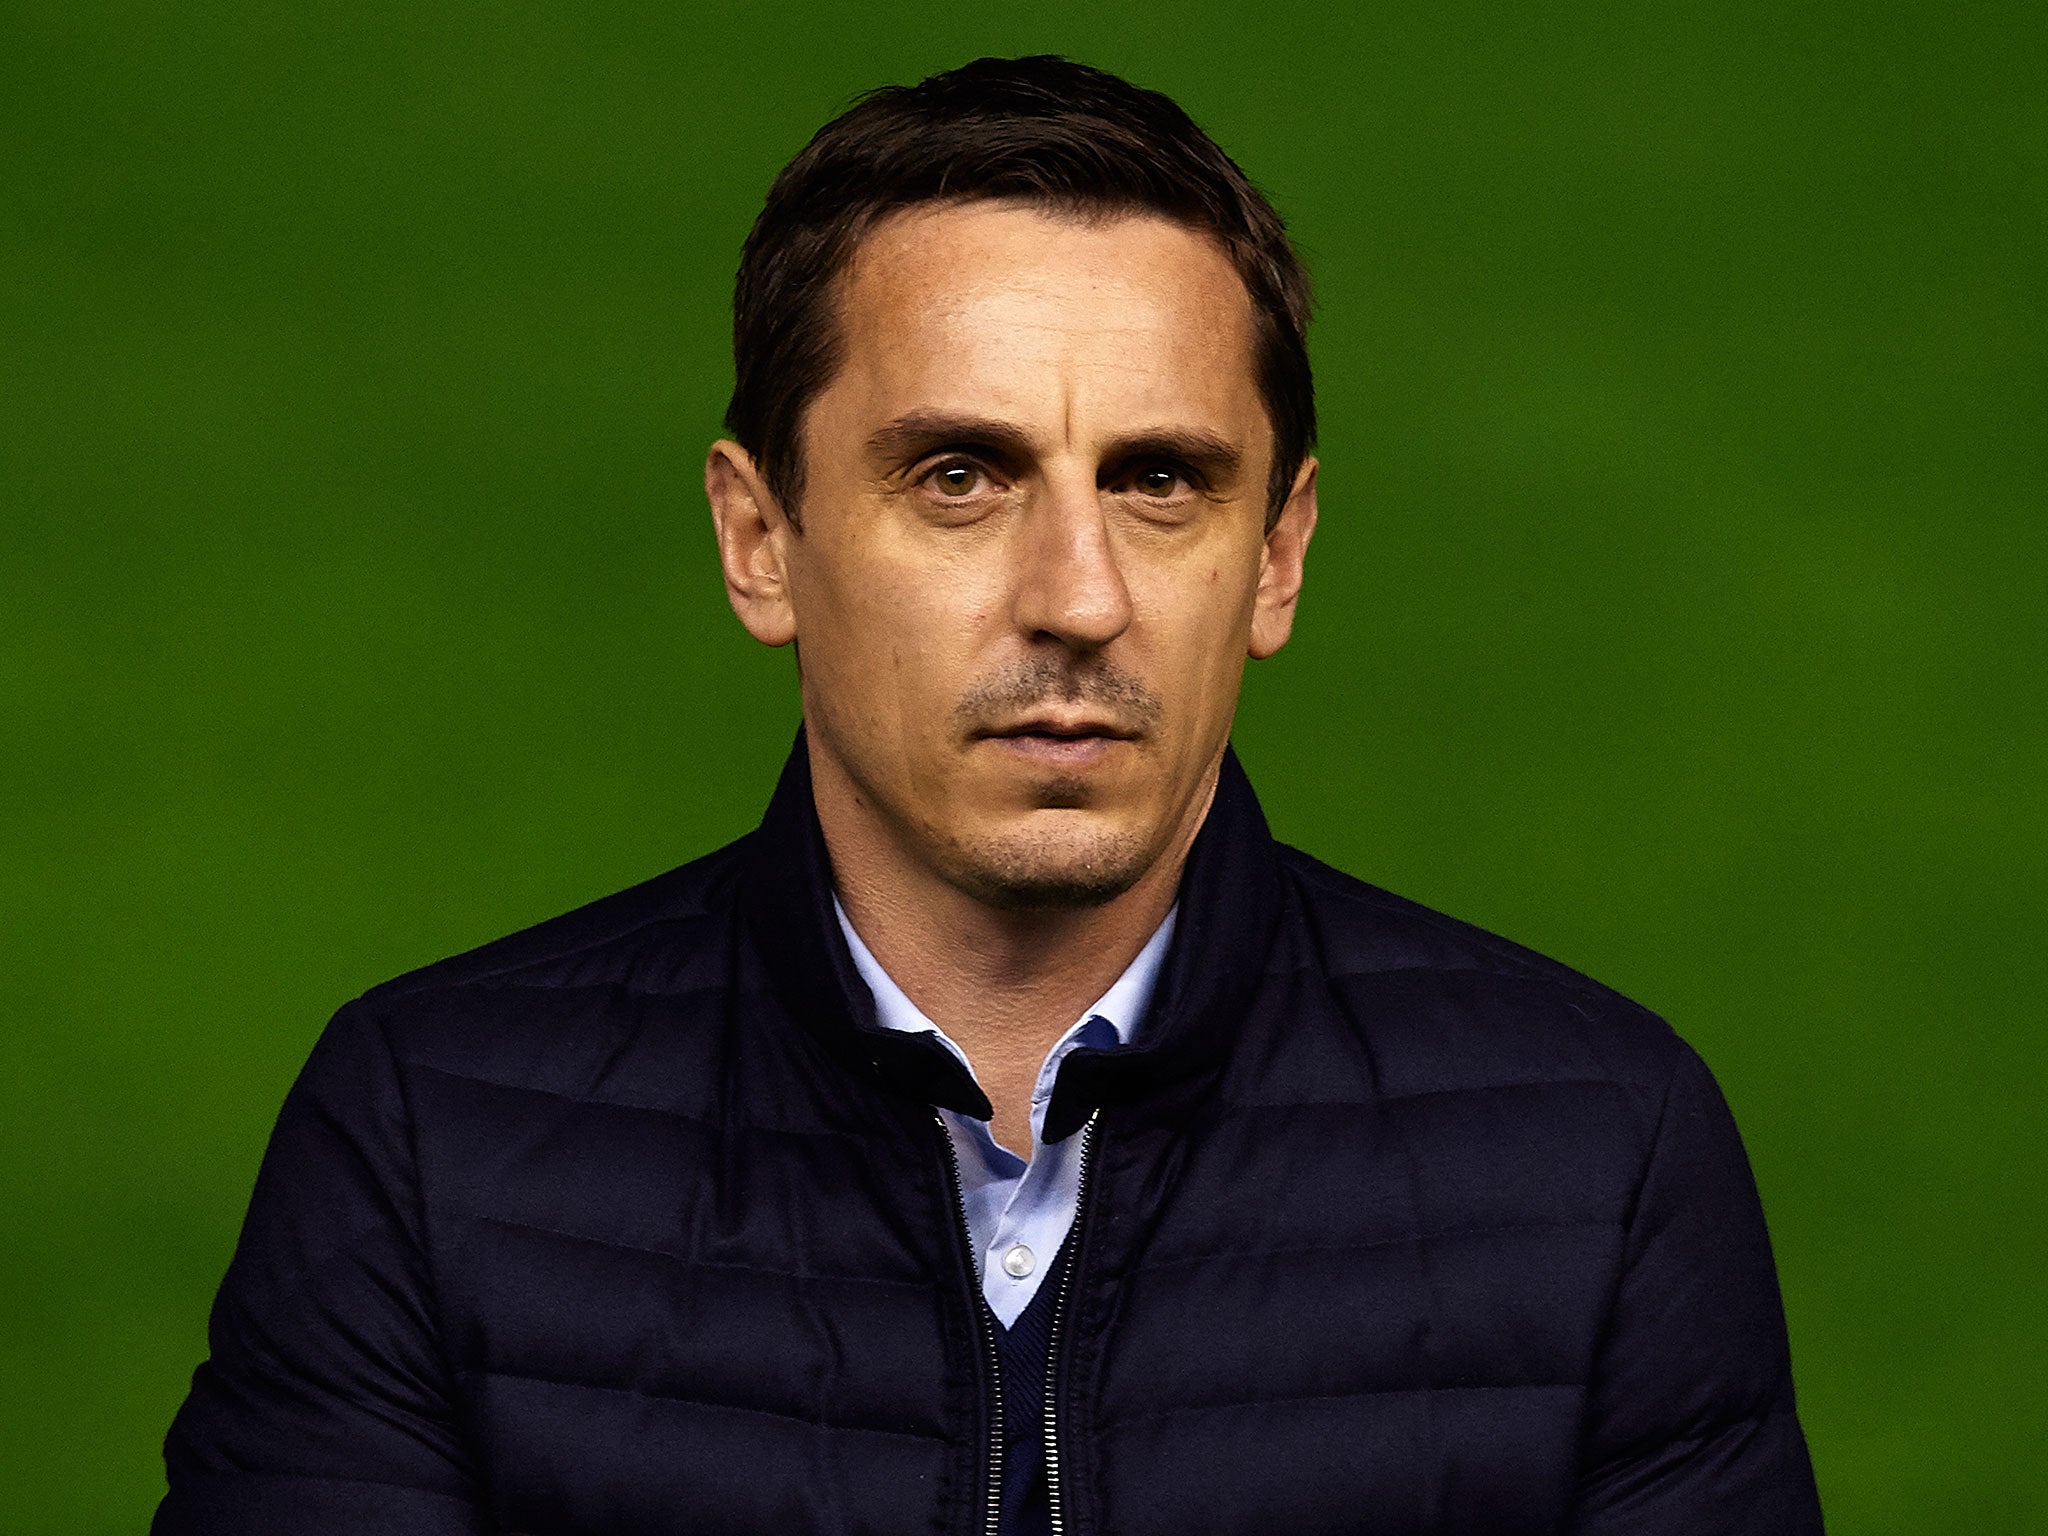 Gary Neville labelled Arsenal fans 'embarrassing' for their treatment of Arsene Wenger